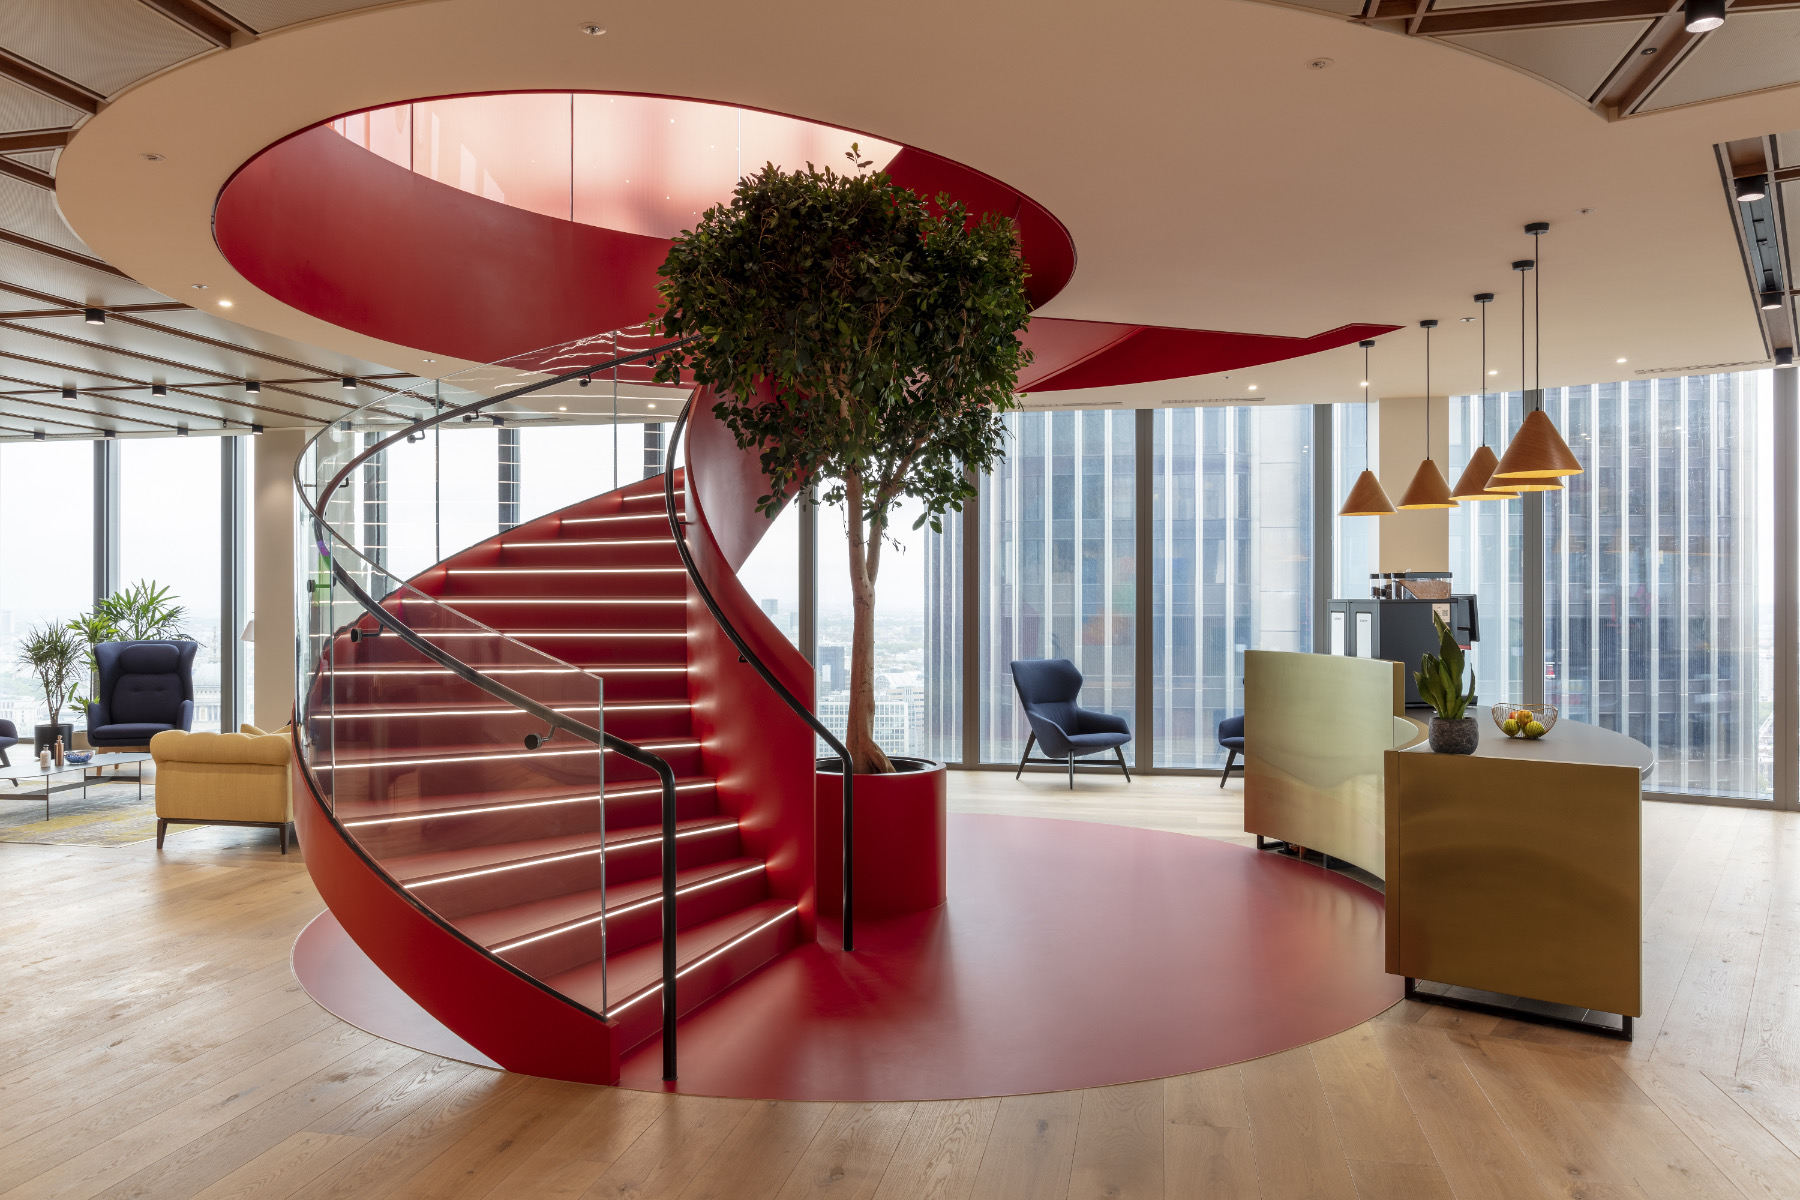 A Look Inside Canopius’ New London Office